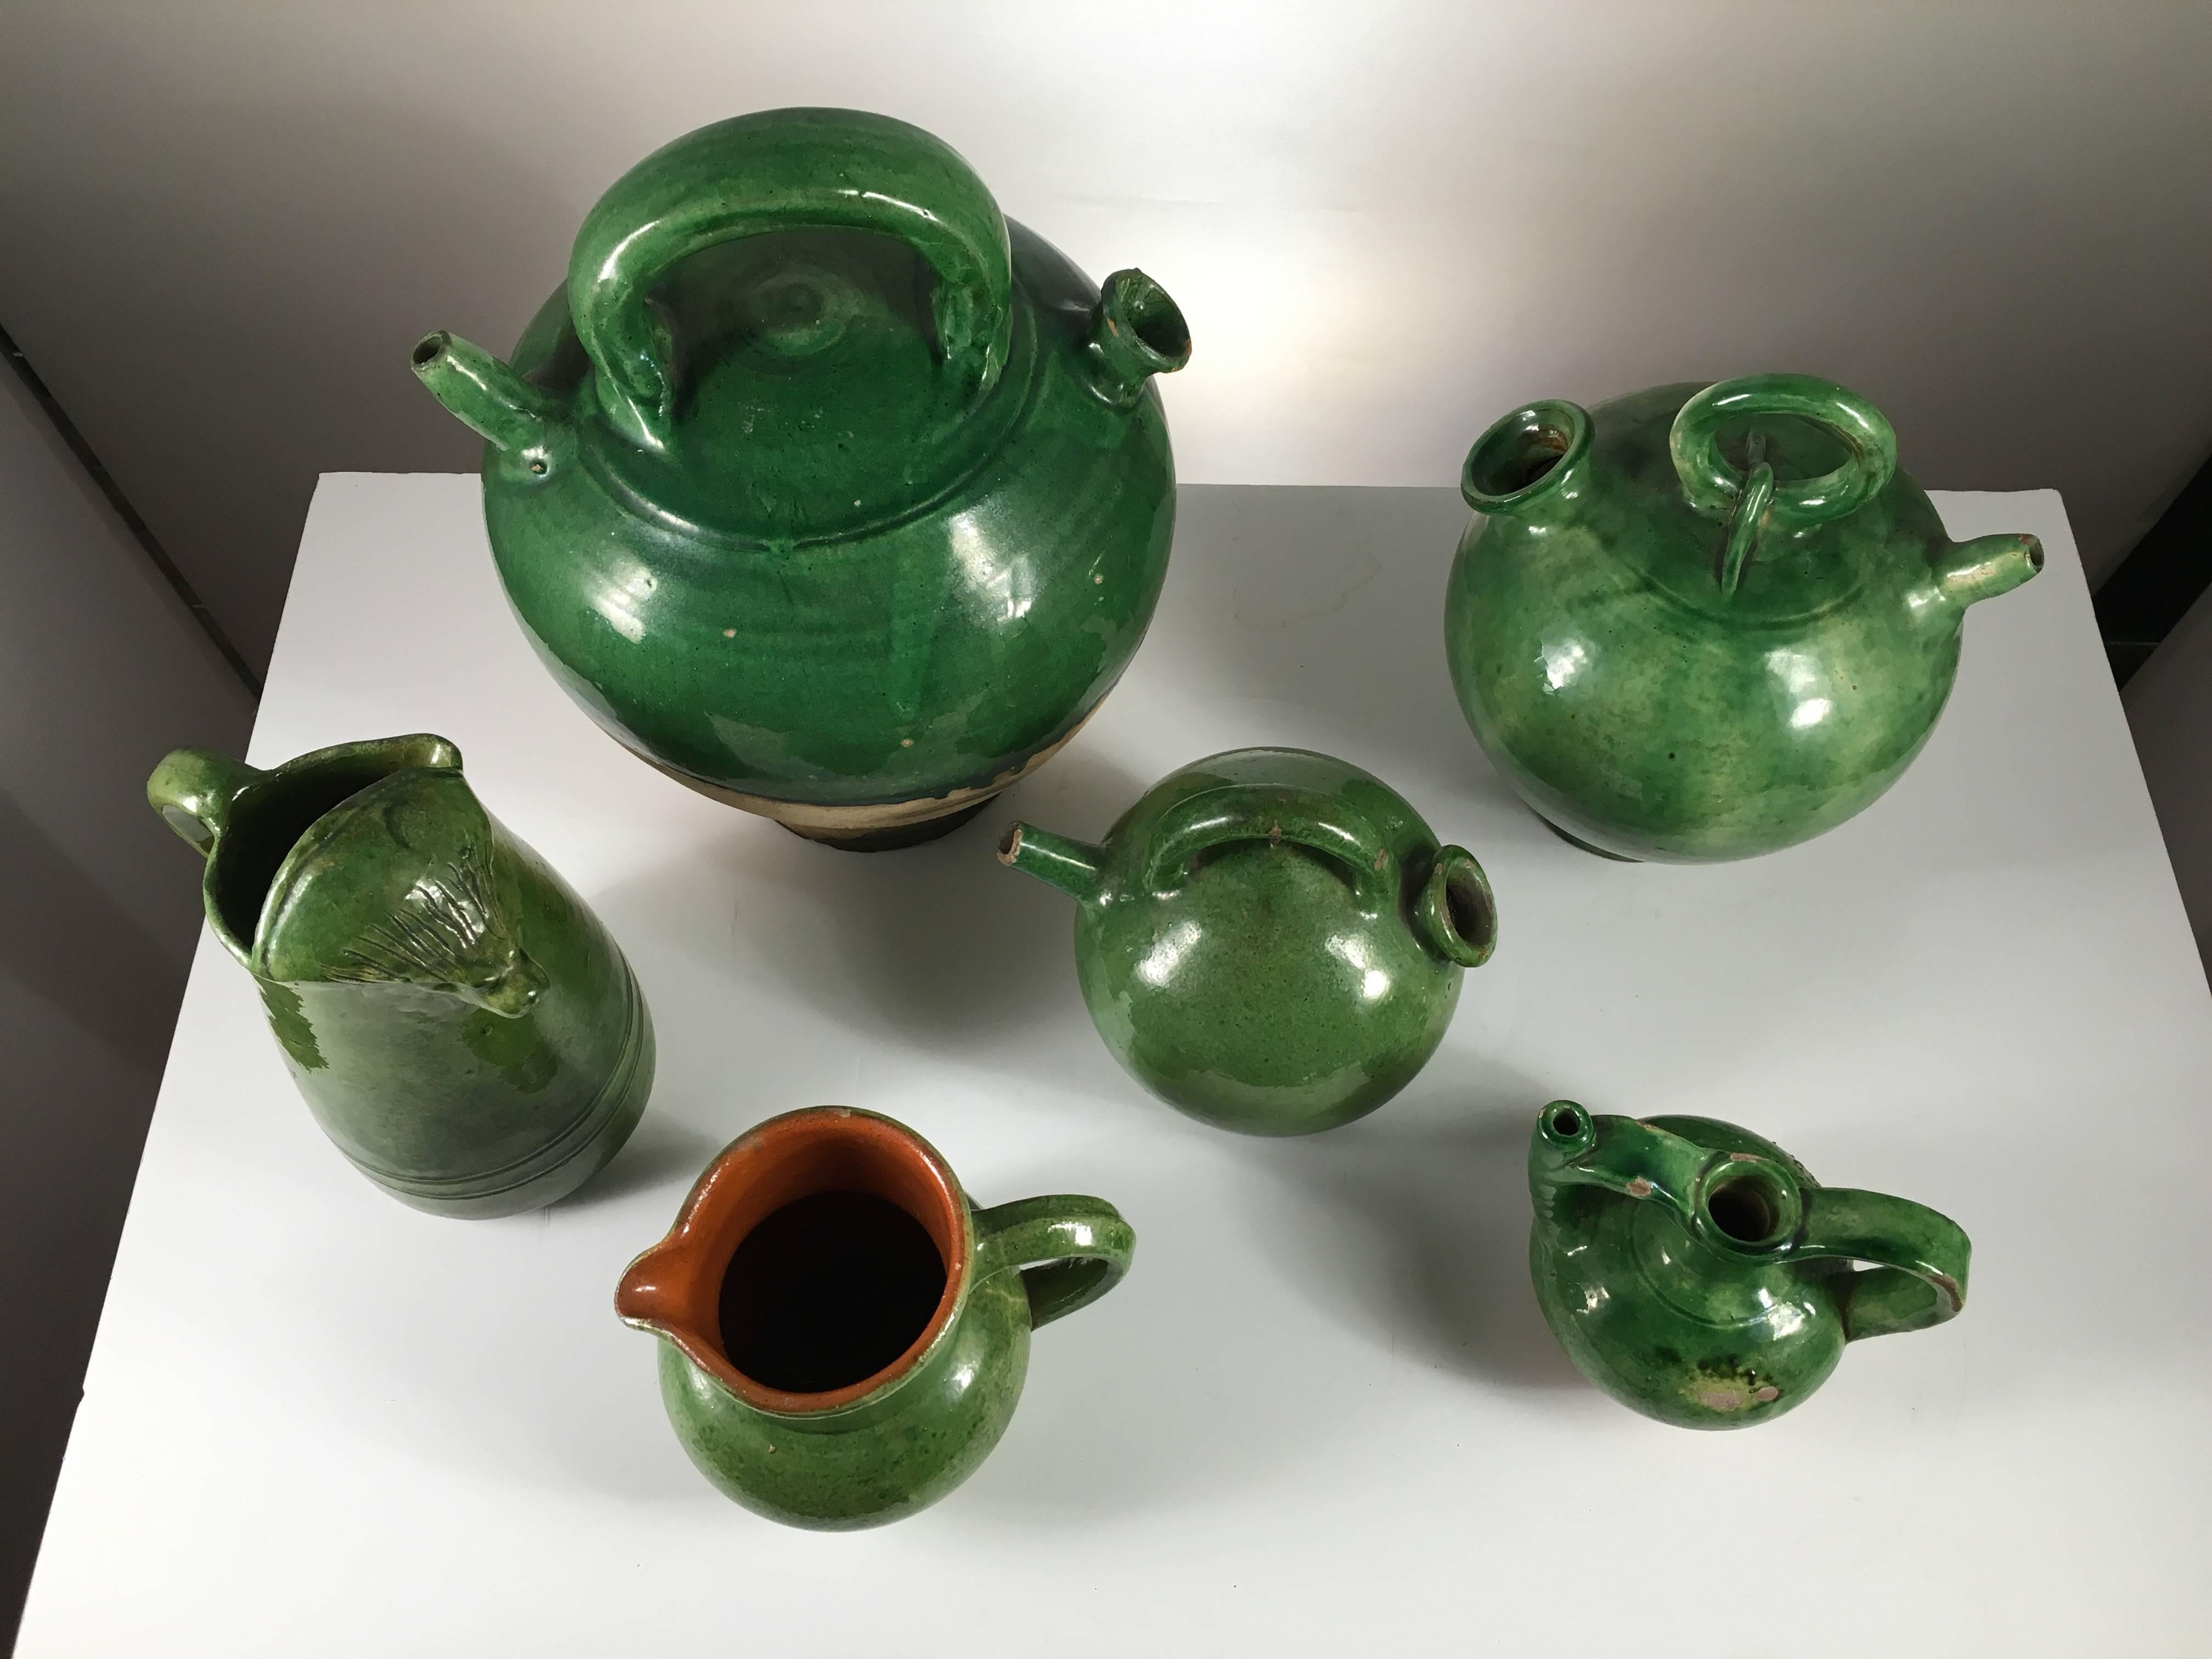 French Provincial Collection of Green Provencale Pottery, French, 19th & 20th Century